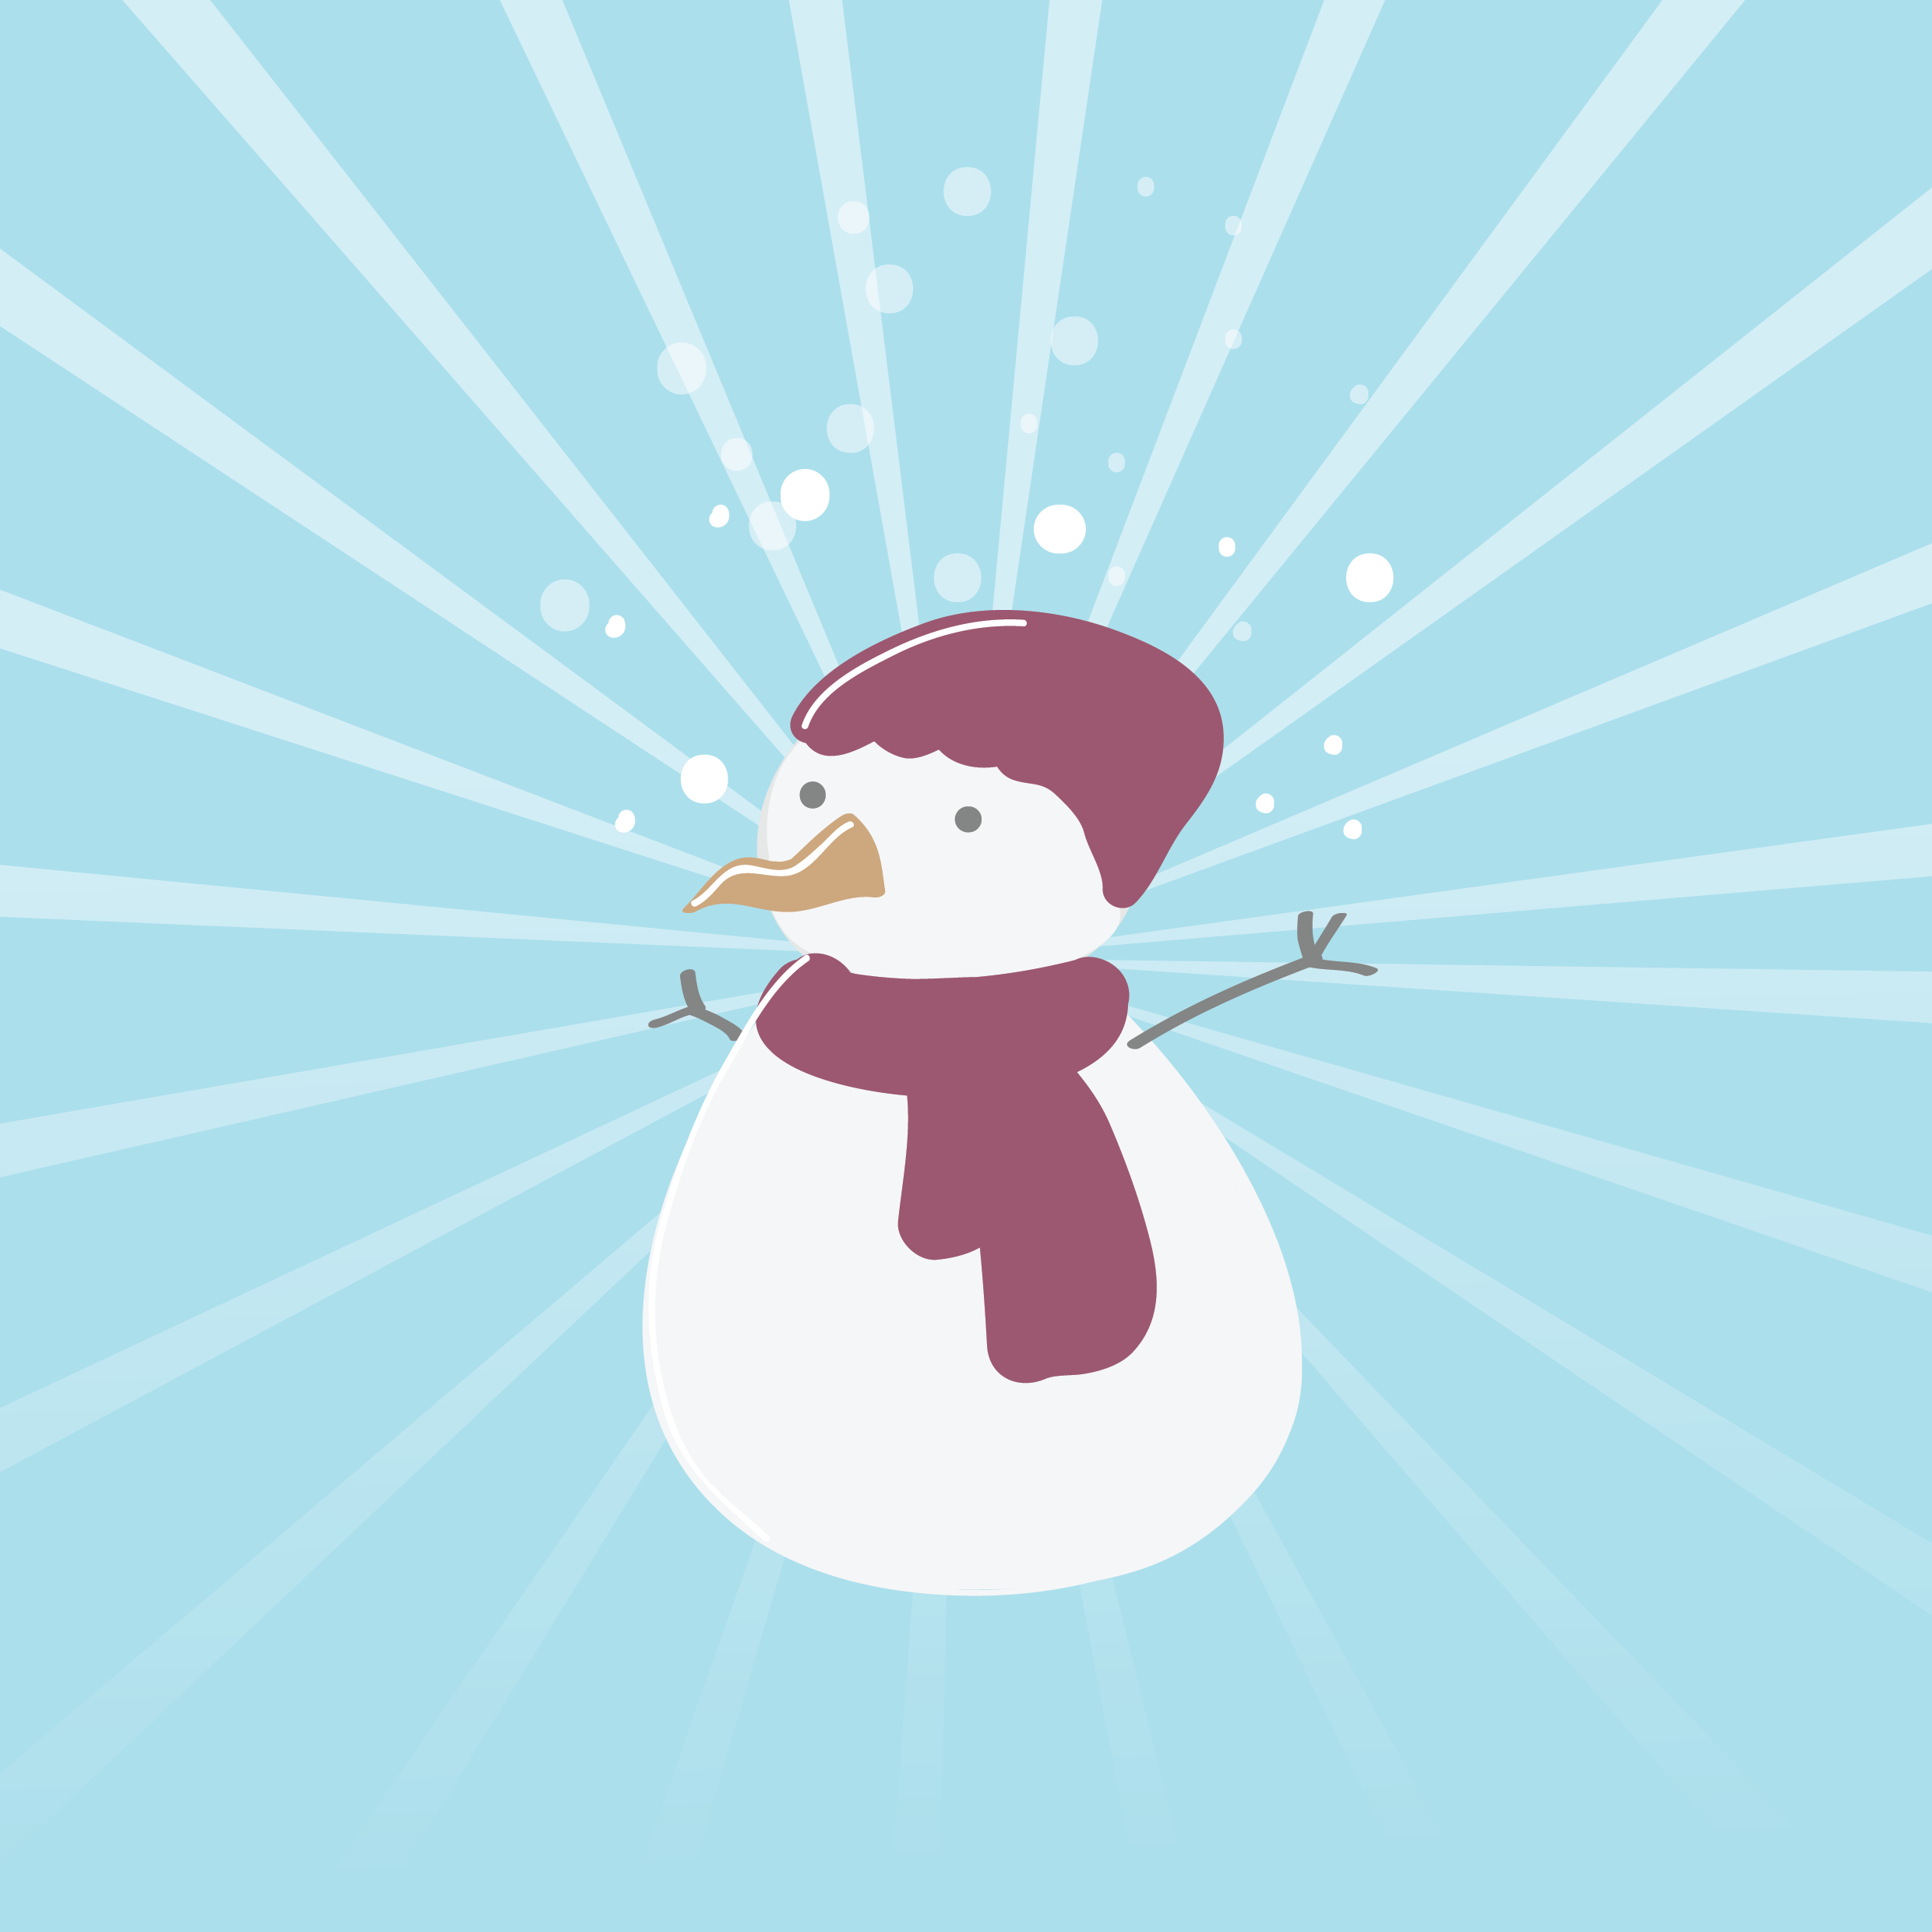 a snowman with a scarf and hat